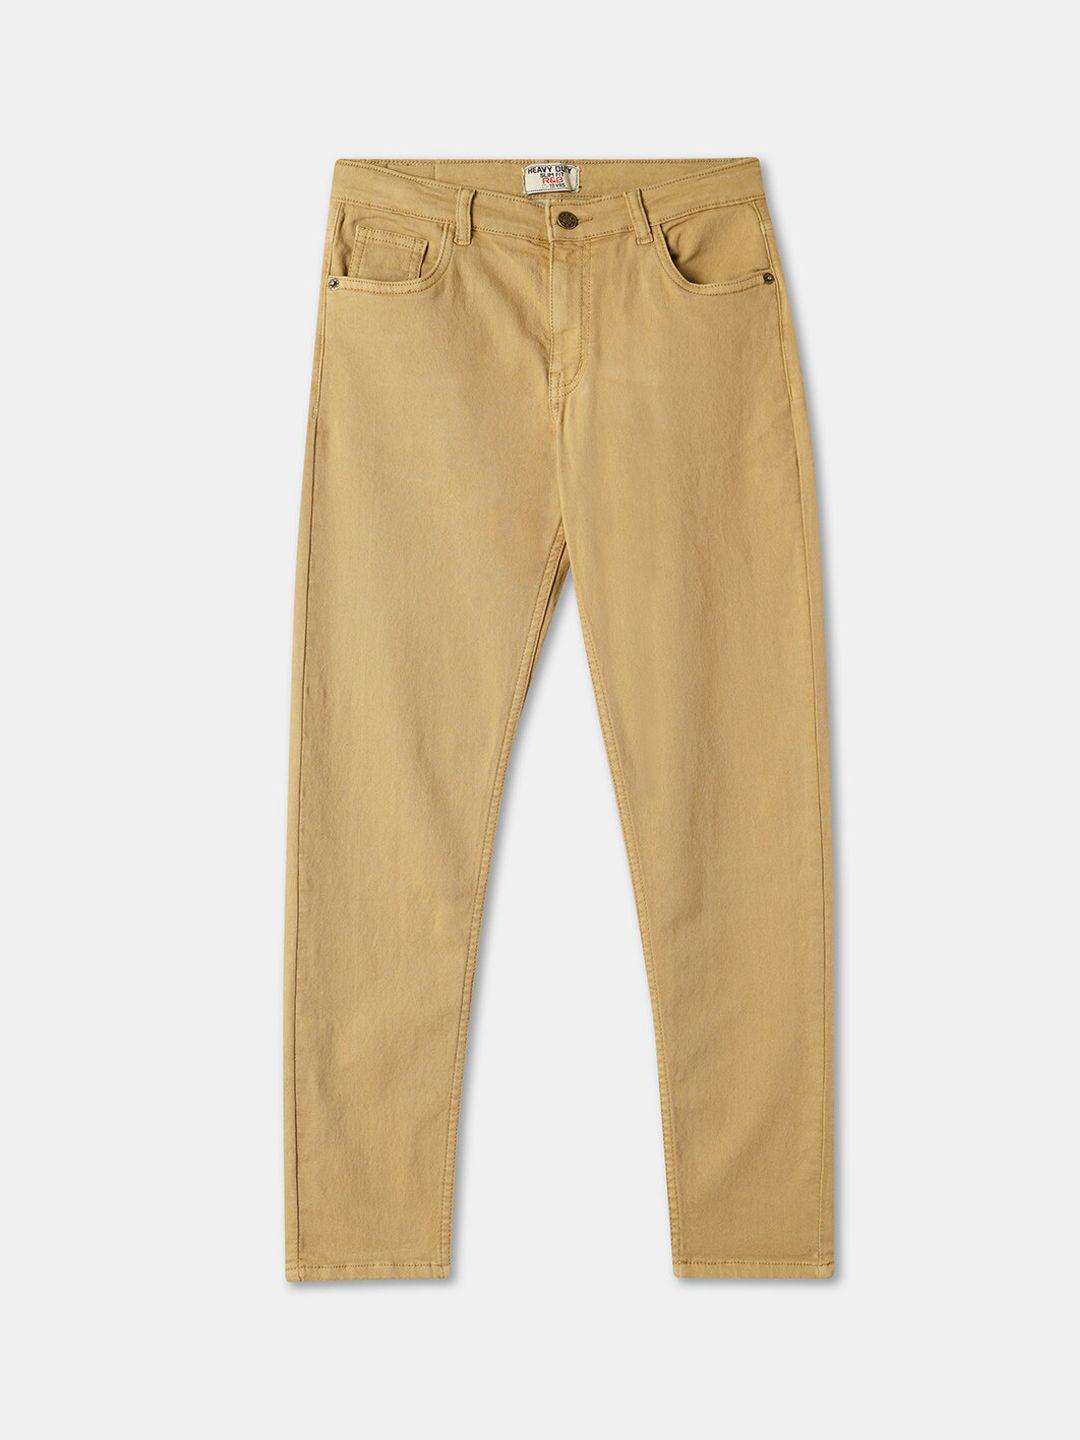 r&b boys mid-rise clean look cotton jeans